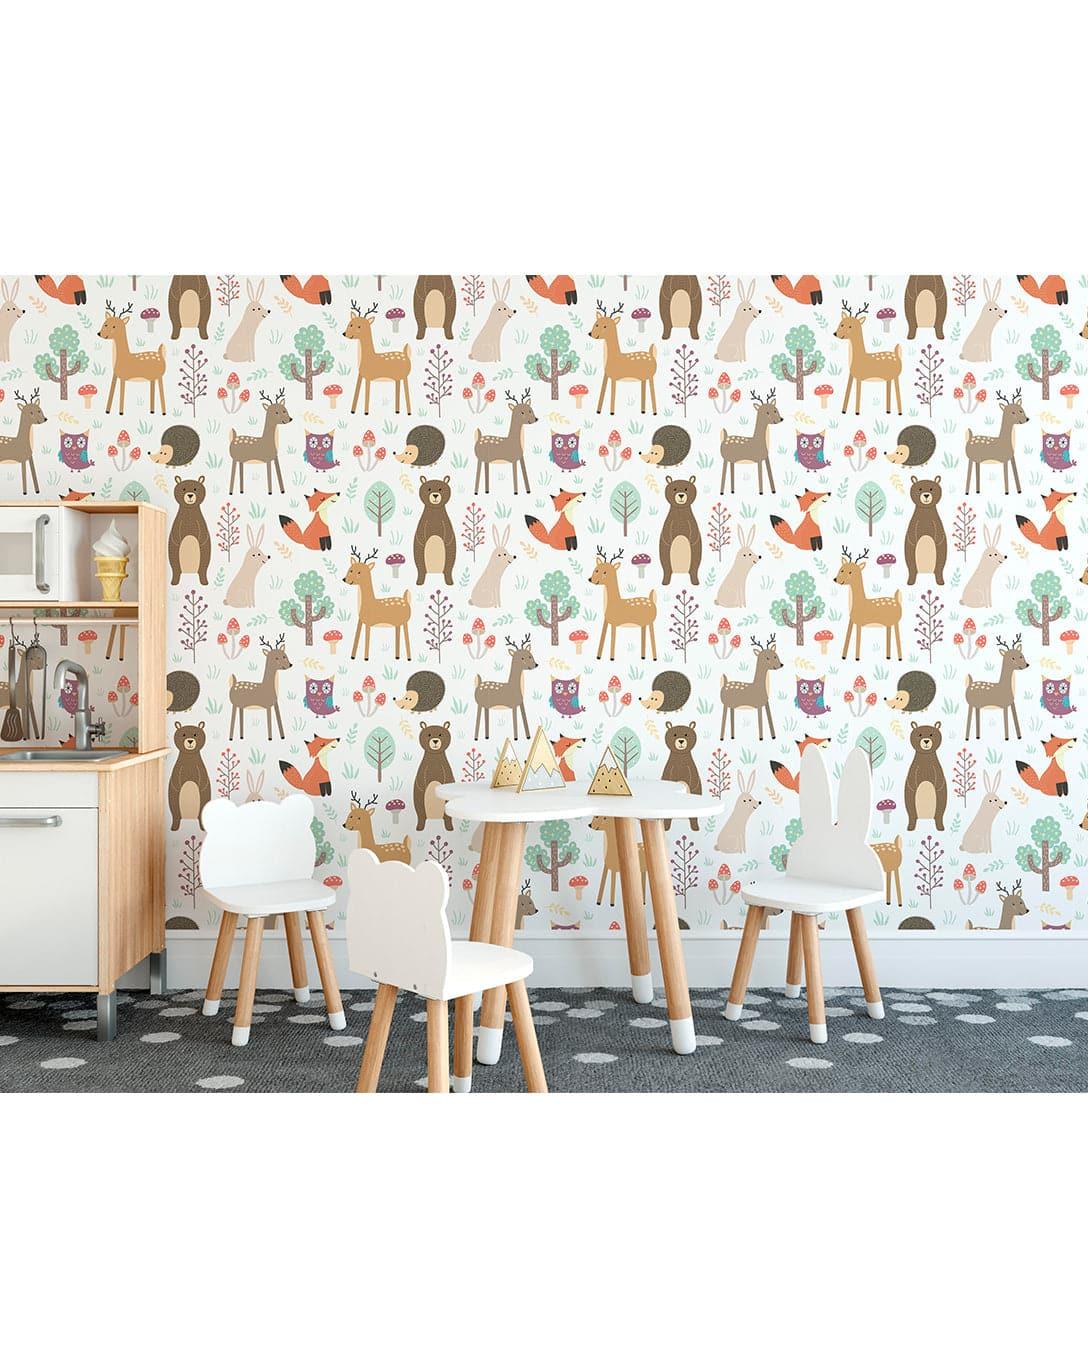 Woodland Critters Forest Animals Kids Removable Wallpaper Woodland Critters Forest Animals Kids Removable Wallpaper 